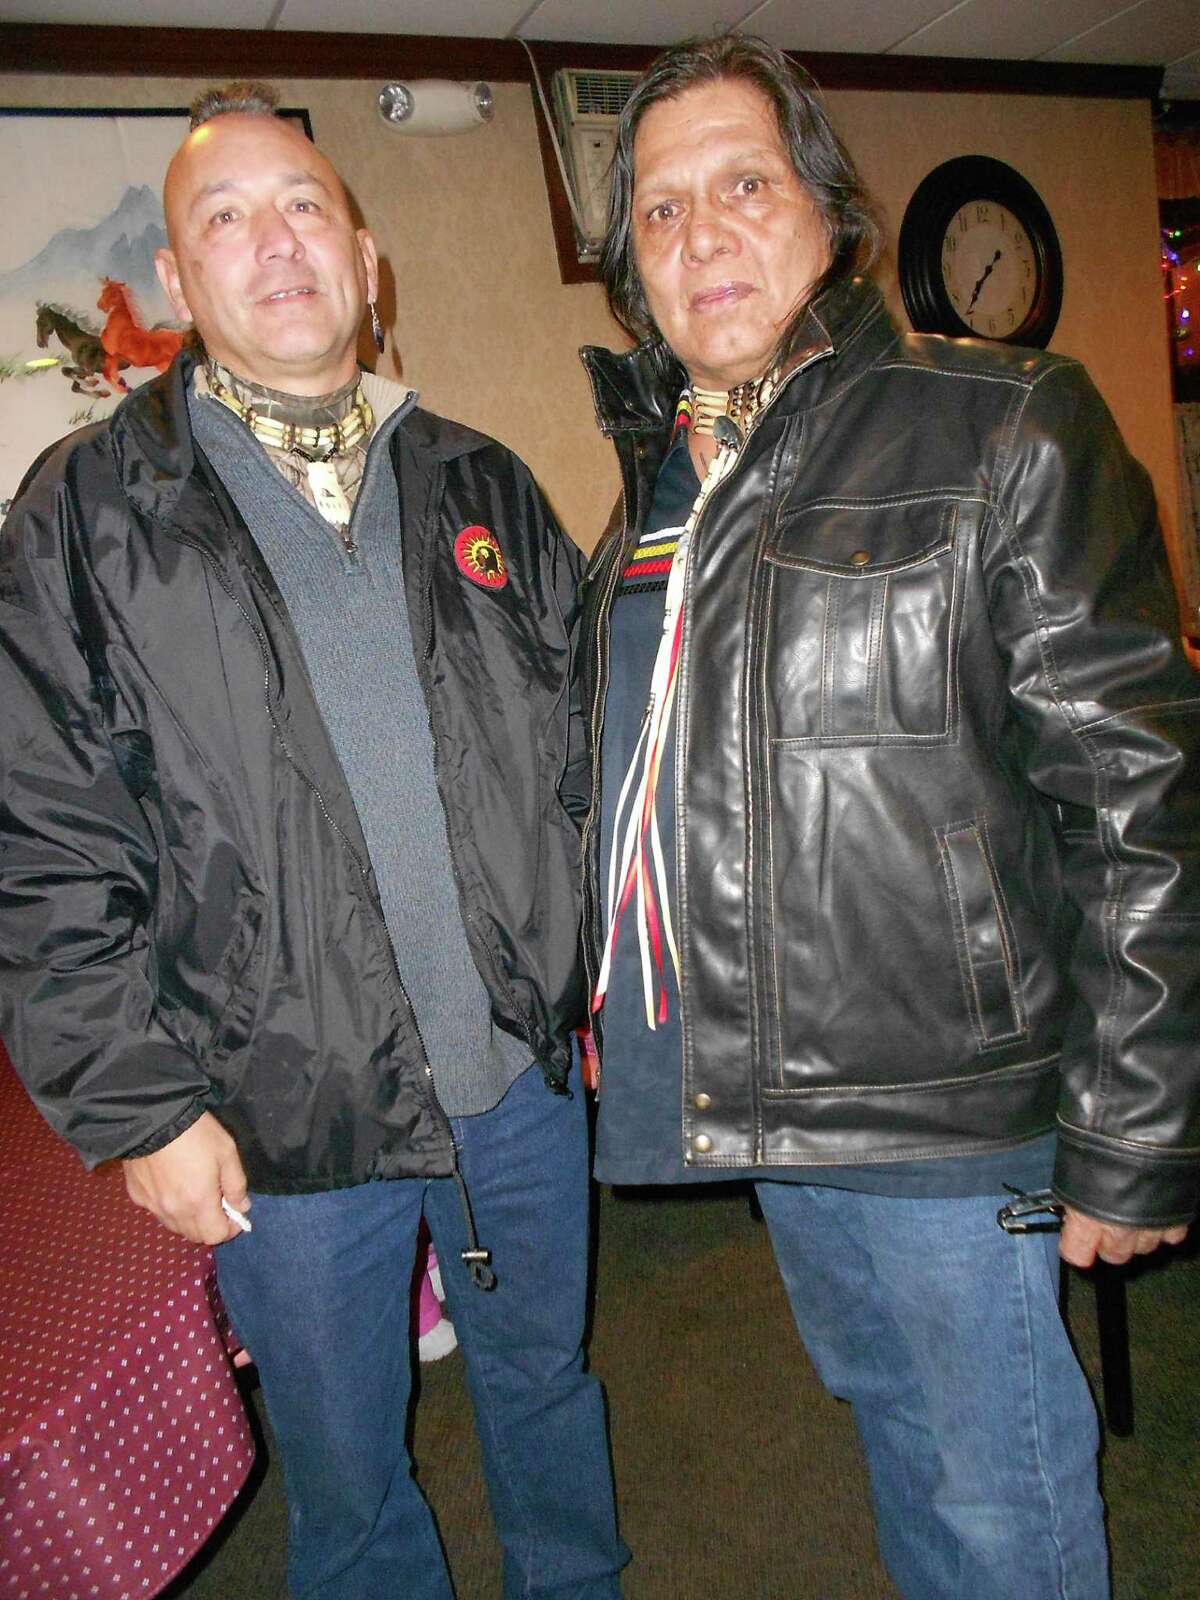 William Roger Jock, left, with Thomas Angus Square. They are members of the Men's Council of the Mohawk People of the Longhouse who were acquitted in U.S. District Court of running an illegal reservation casino. (Source: Men's Council)